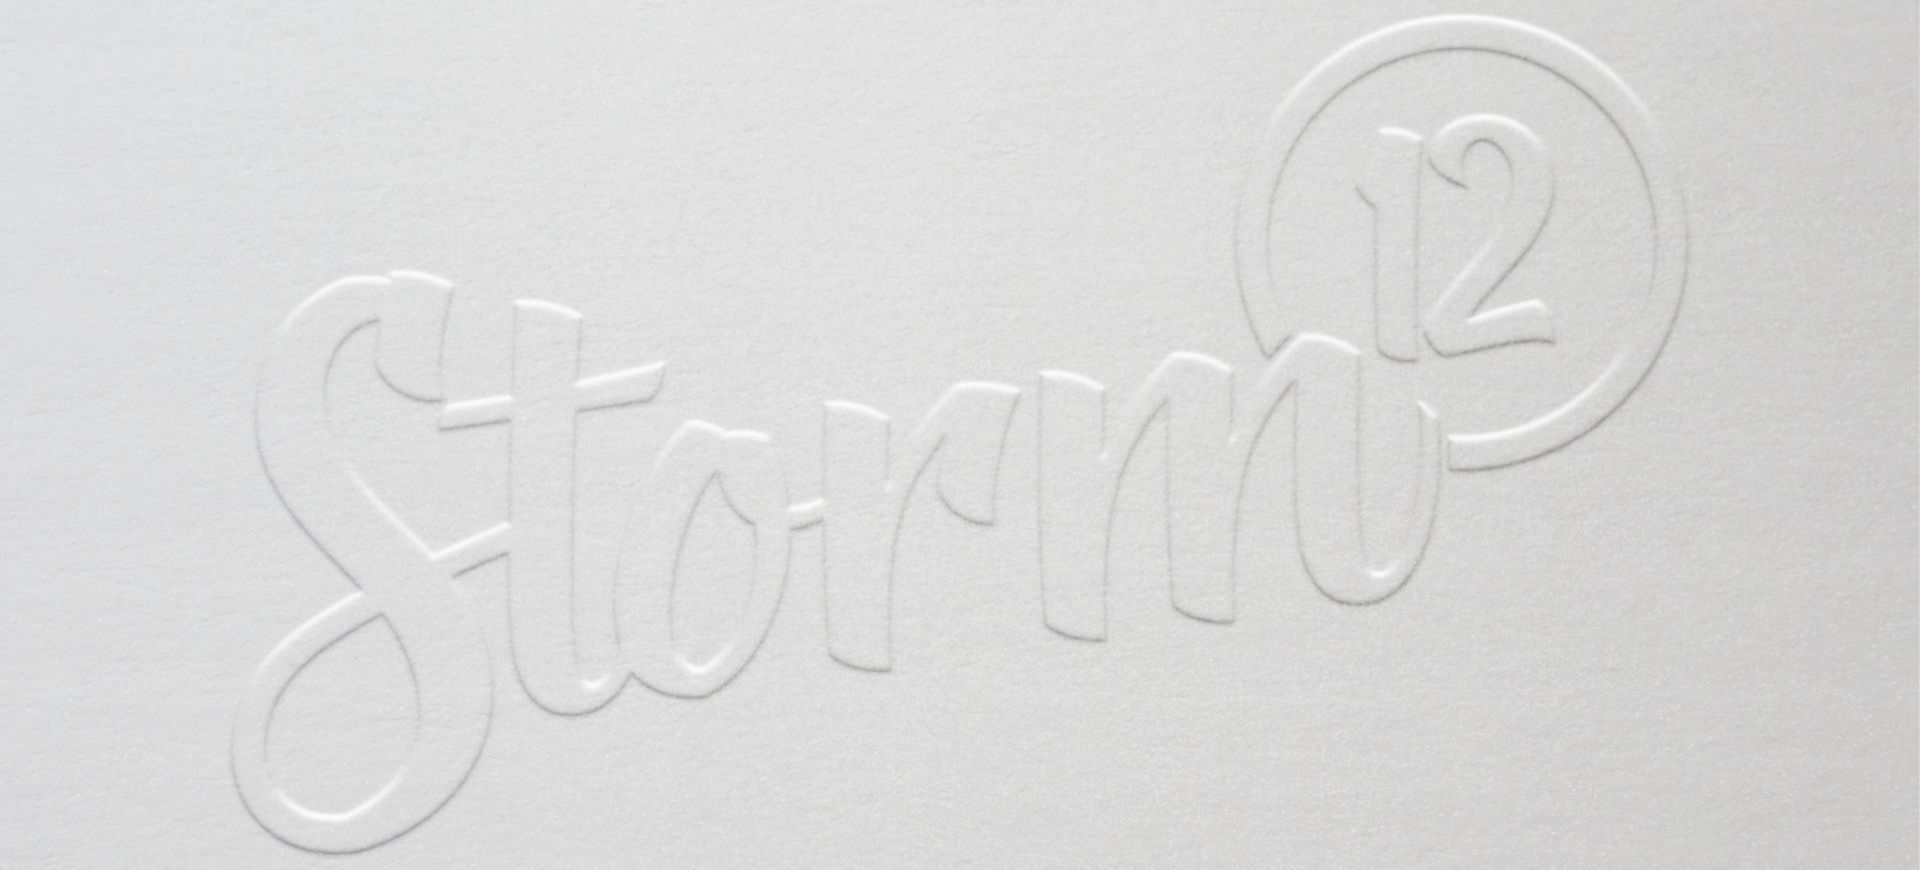 How Embossed Designs Can Be Use To Promote Your Brand